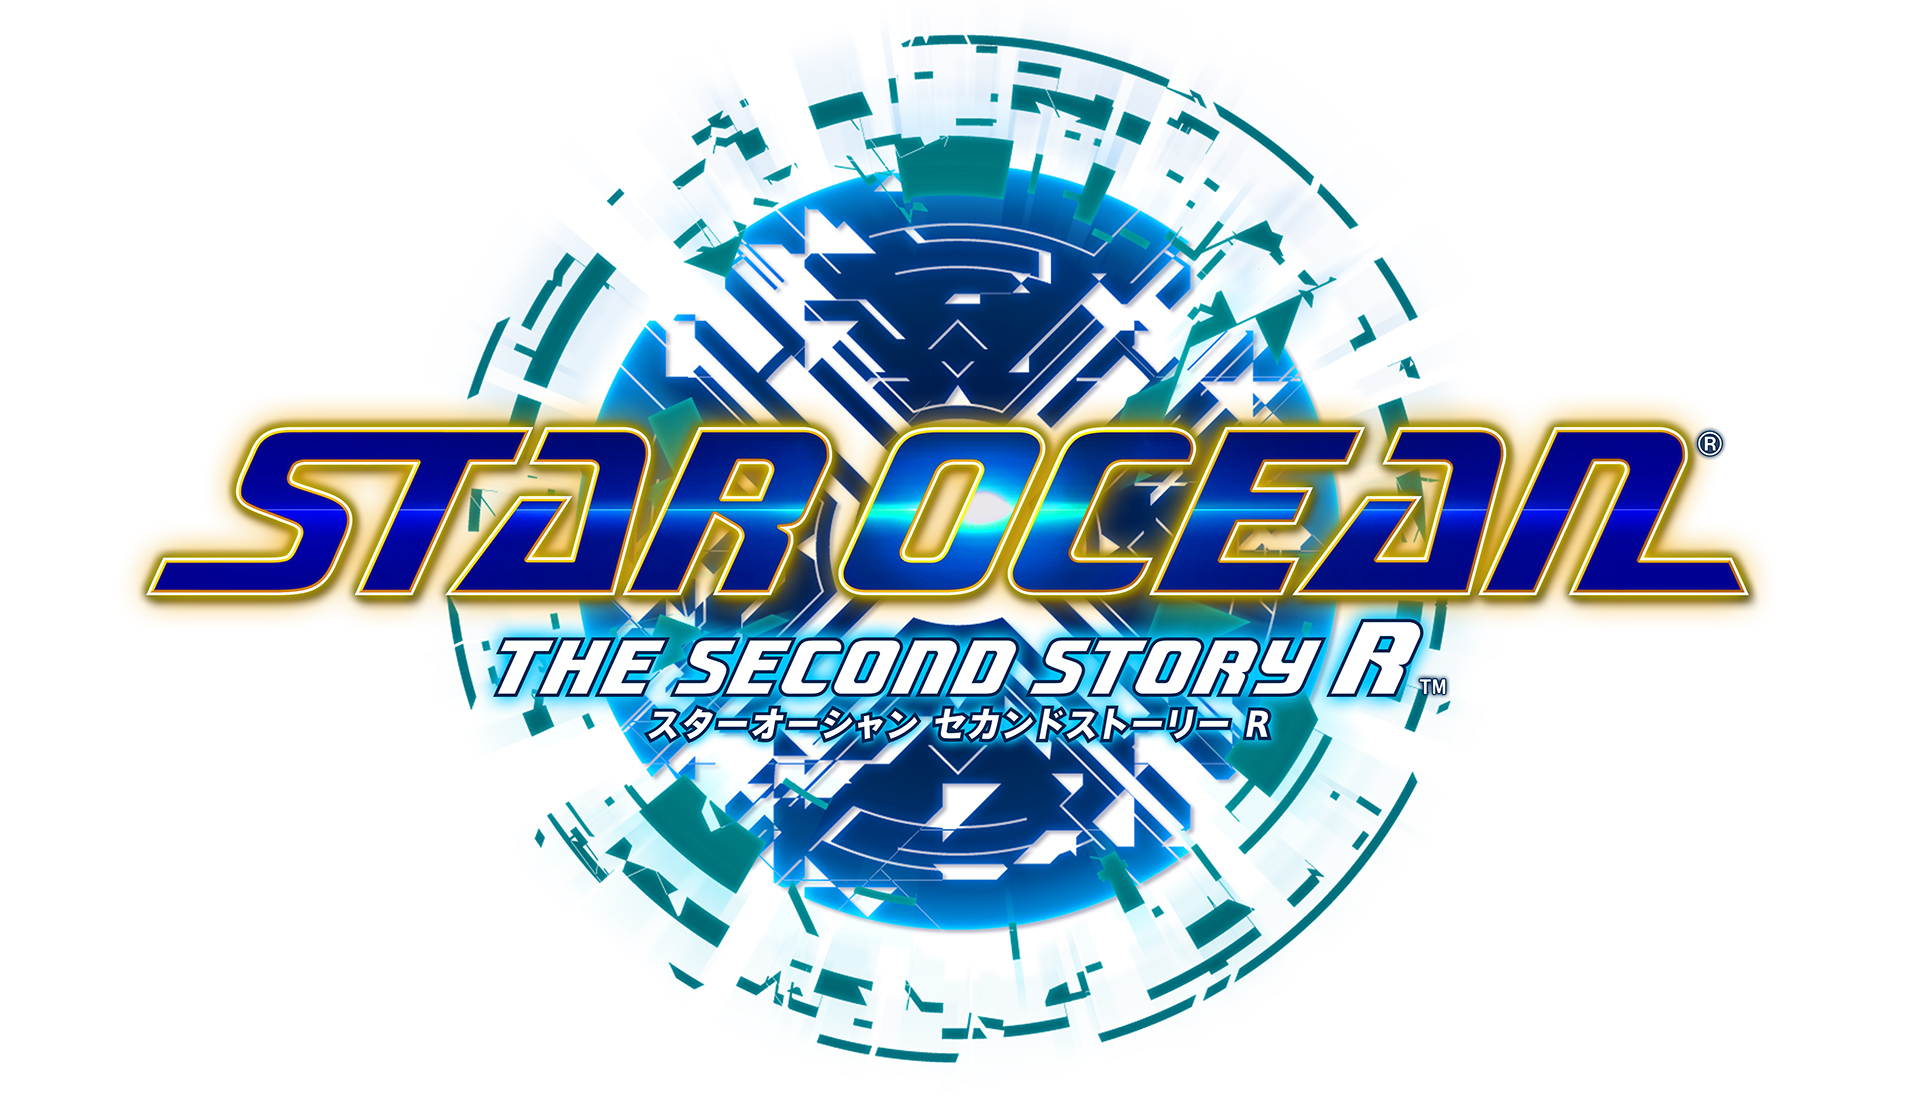 STAR OCEAN THE SECOND STORY R』──新システム「ブレイク 